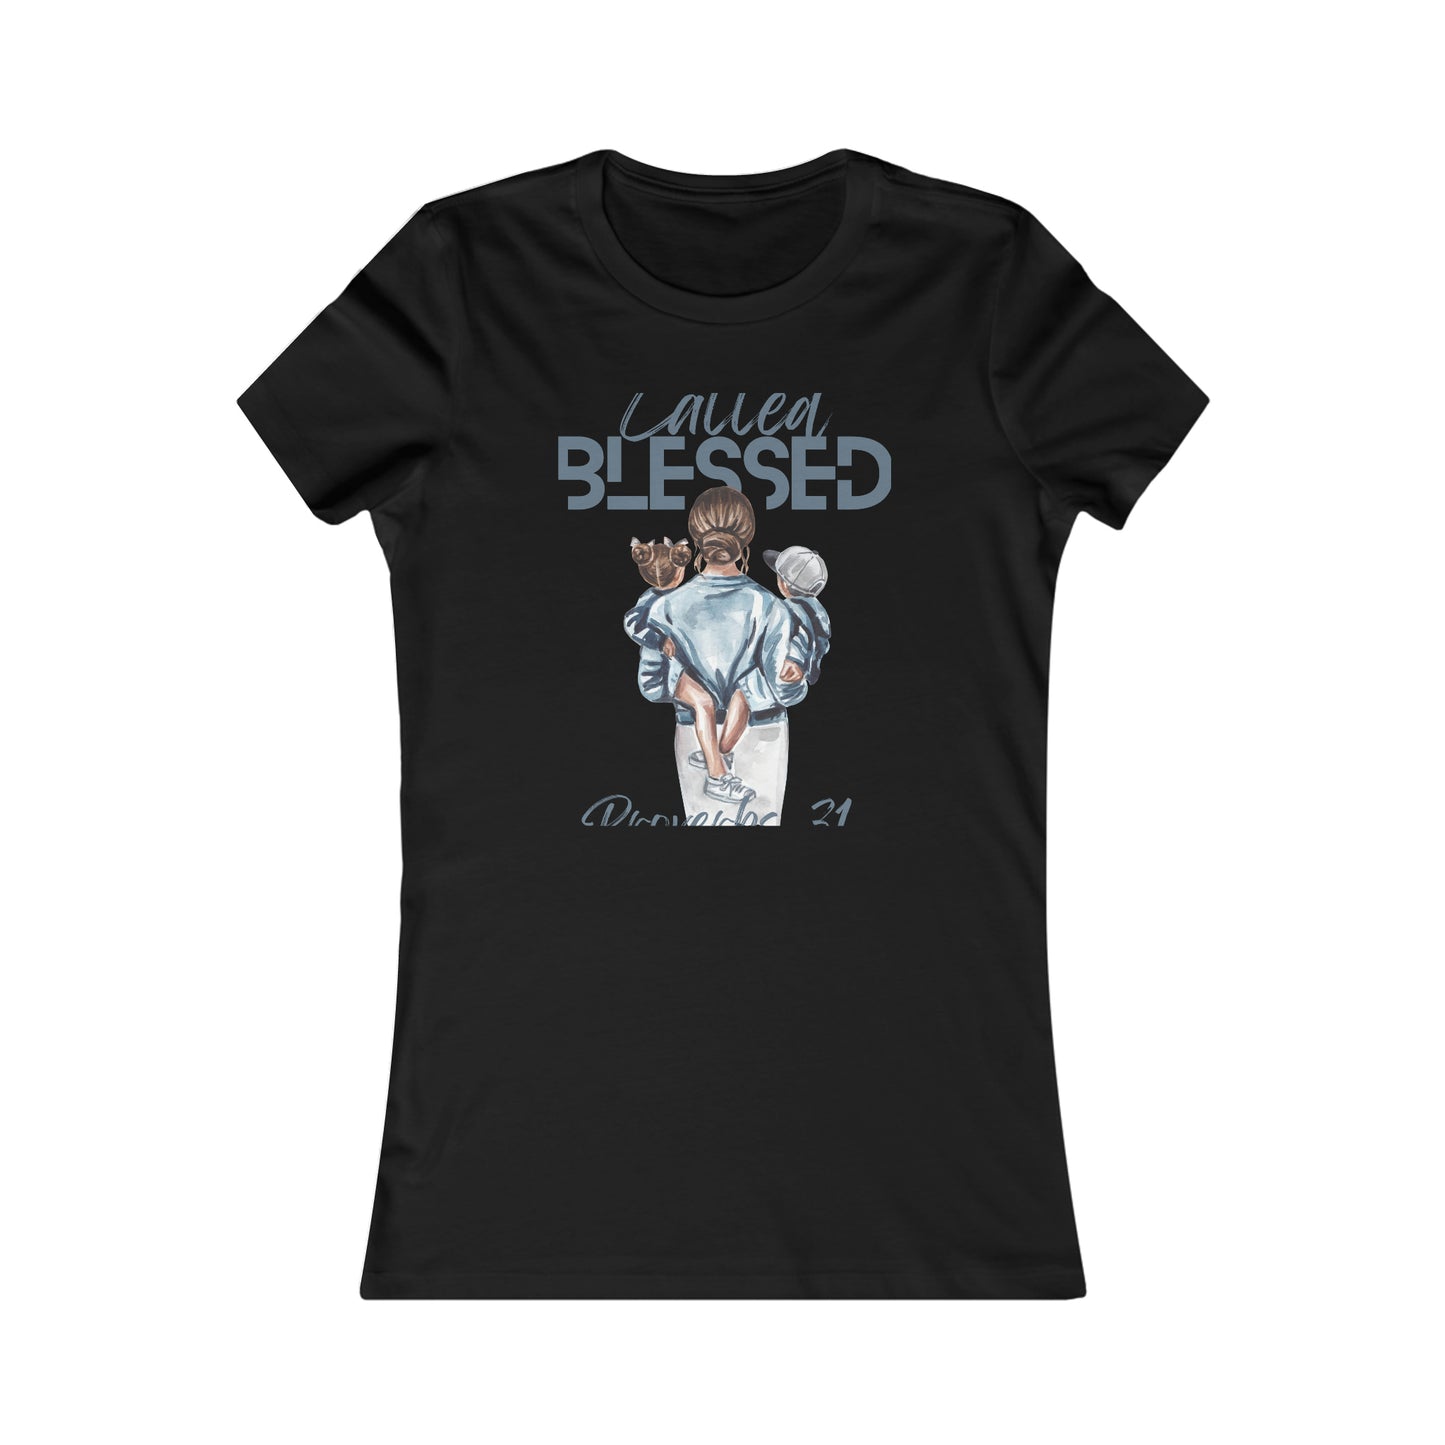 CALLED BLESSED Tee